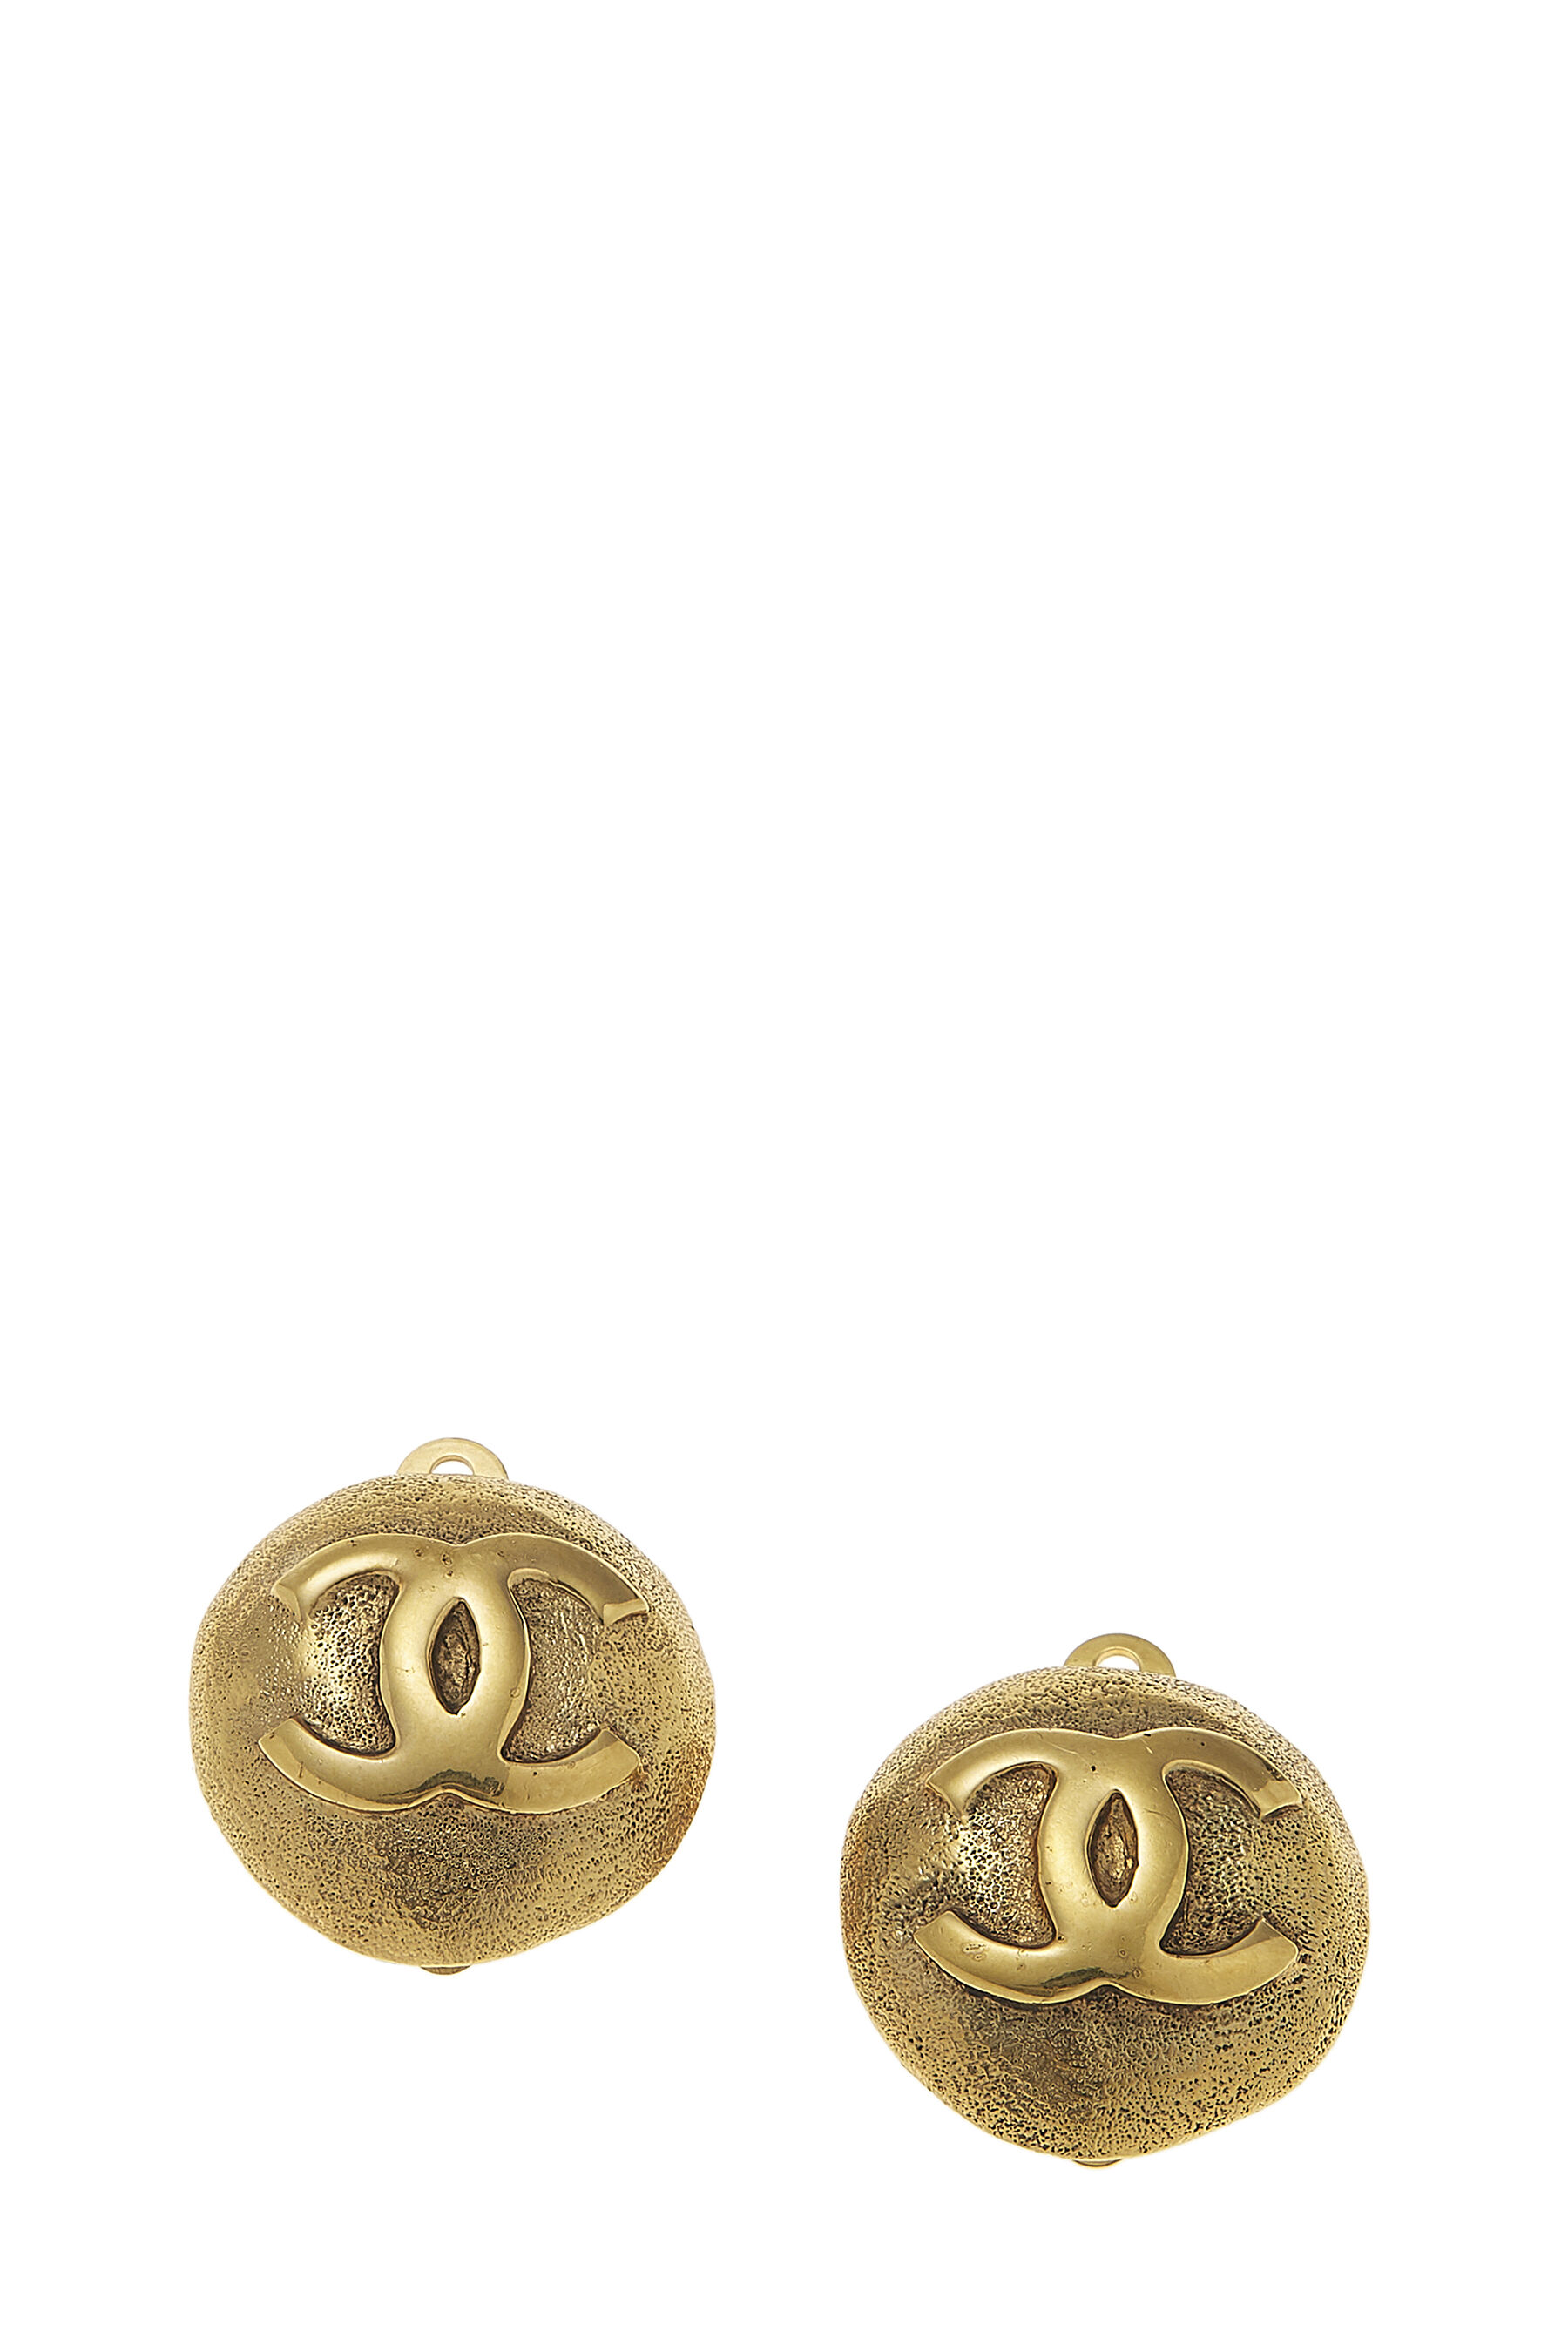 Chanel Gold Engraved 'CC' Round Earrings Q6JAPF17DB096